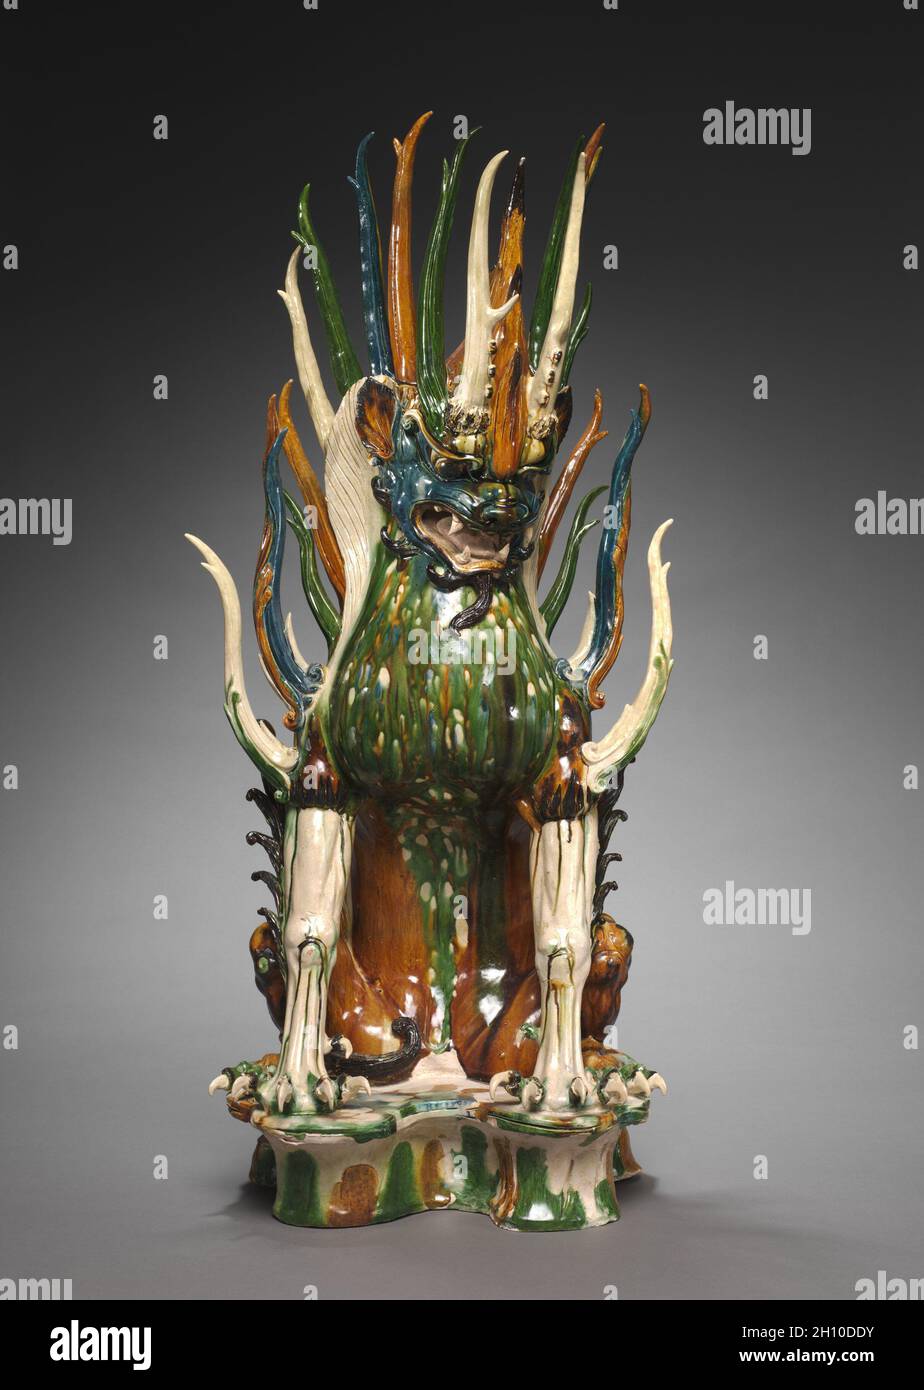 Tomb Guardian with Animal Head, early 700s. China, probably Shaanxi province, Xi'an, Tang dynasty (618-907). Glazed earthenware, sancai (three-color) ware; overall: 92.3 x 43.8 x 41.9 cm (36 5/16 x 17 1/4 x 16 1/2 in.). Stock Photo